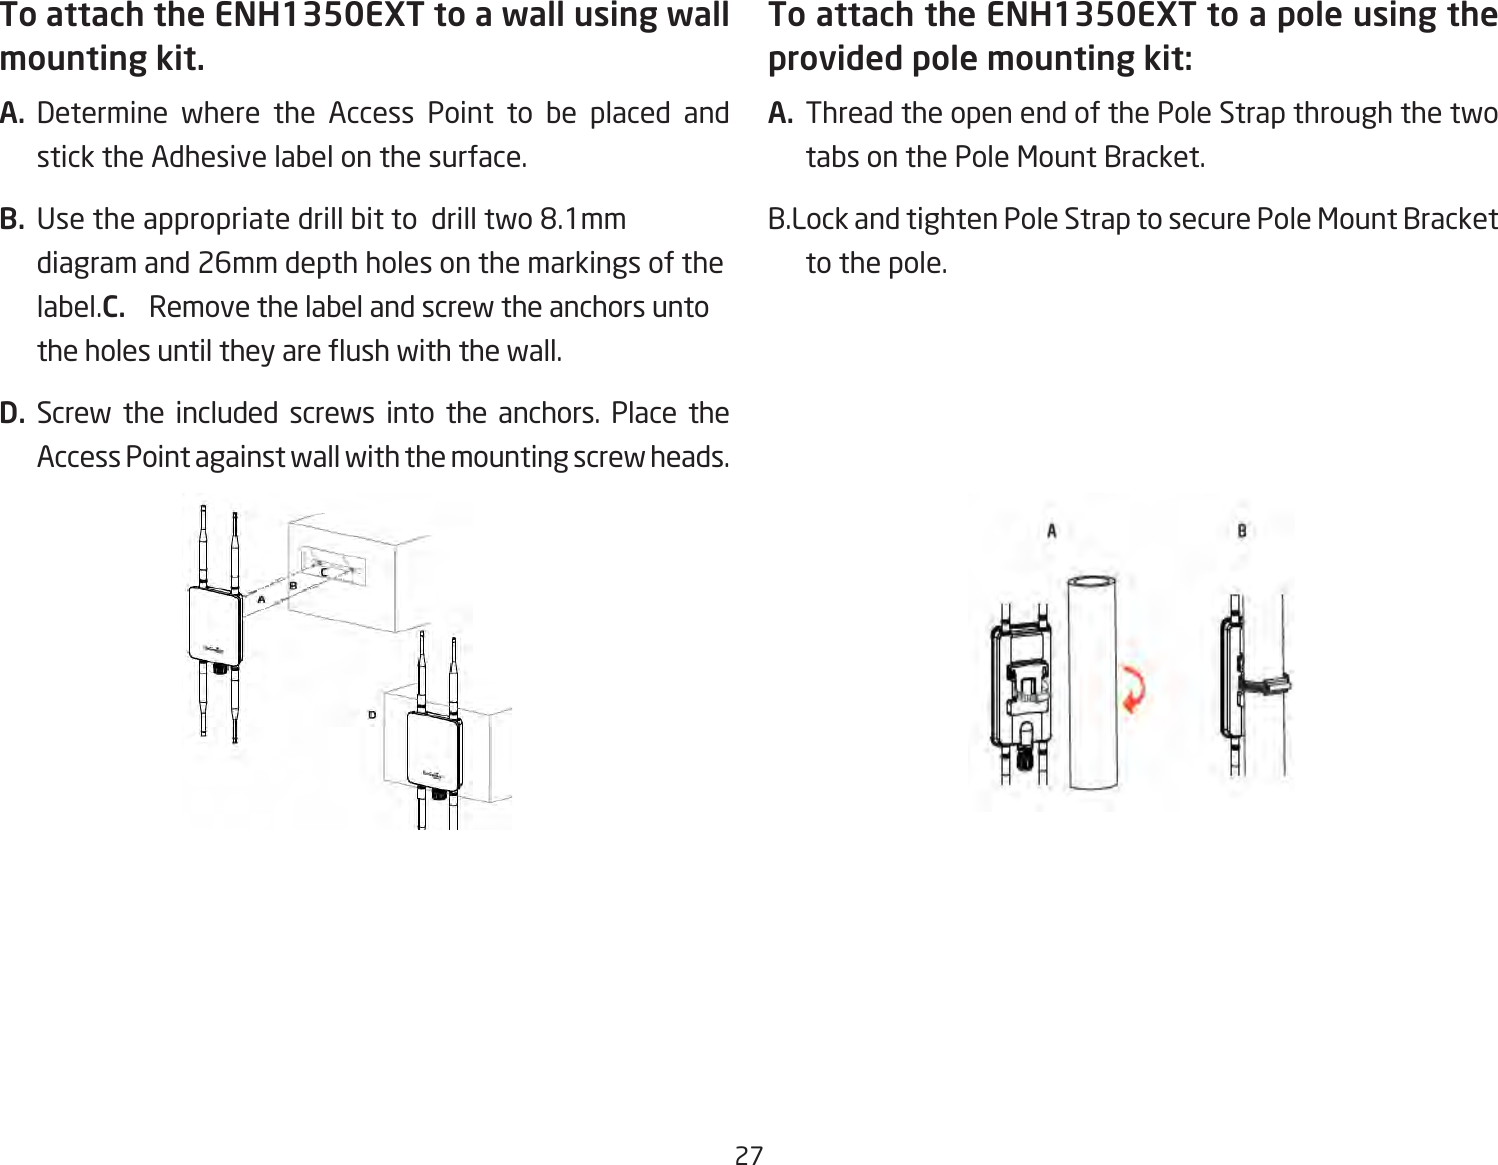 27To attach the ENH1350EXT to a wall using wall mounting kit.A.  Determine where the Access Point to be placed and stick the Adhesive label on the surface.B.  Use the appropriate drill bit to  drill two 8.1mm diagram and 26mm depth holes on the markings of the label.C.  Remove the label and screw the anchors unto the holes until they are ush with the wall.D. Screw the included screws into the anchors. Place the Access Point against wall with the mounting screw heads.To attach the ENH1350EXT to a pole using the provided pole mounting kit:A.  Thread the open end of the Pole Strap through the two tabs on the Pole Mount Bracket.B.Lock and tighten Pole Strap to secure Pole Mount Bracket to the pole.